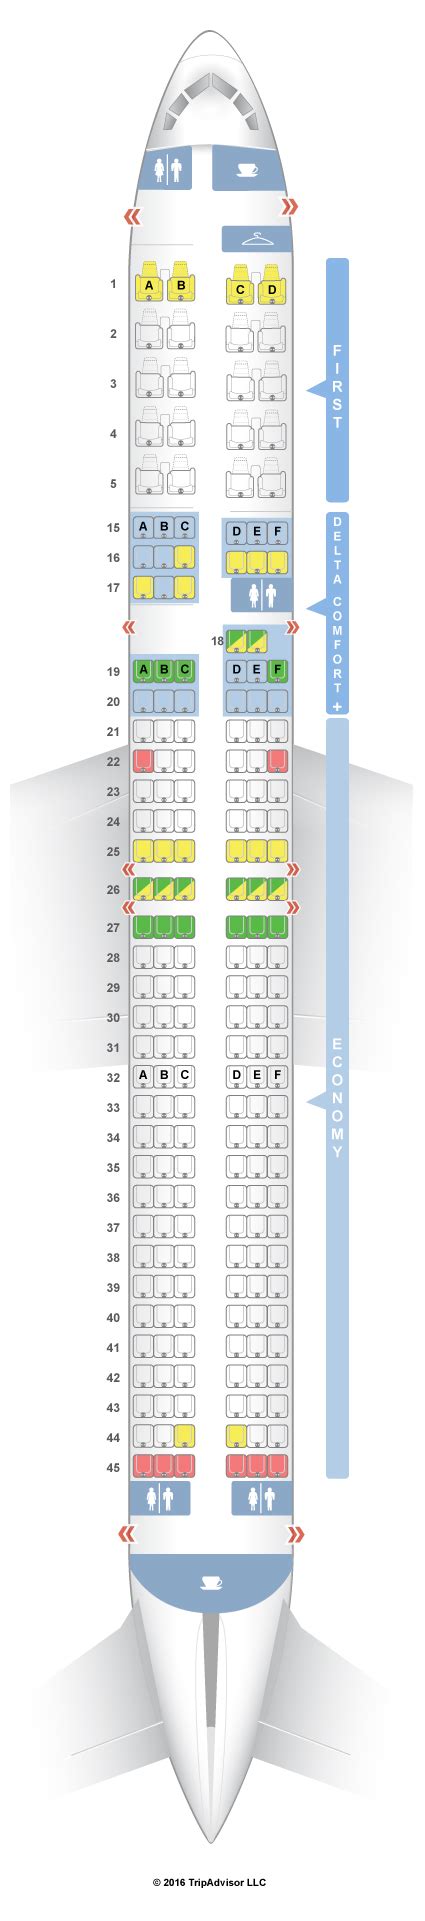 Seatguru 757 delta. View map. Boeing 777-200ER/LR (7CB) Layout 1. Closed Suite Delta One (Rows 1-8) Recliner Delta Premium Select (Rows 20-25) Standard Delta Comfort+ (Rows 30-40) Standard Economy (Rows 44-57) Viewing. For your next Delta flight, use this seating chart to get the most comfortable seats, legroom, and recline on . 